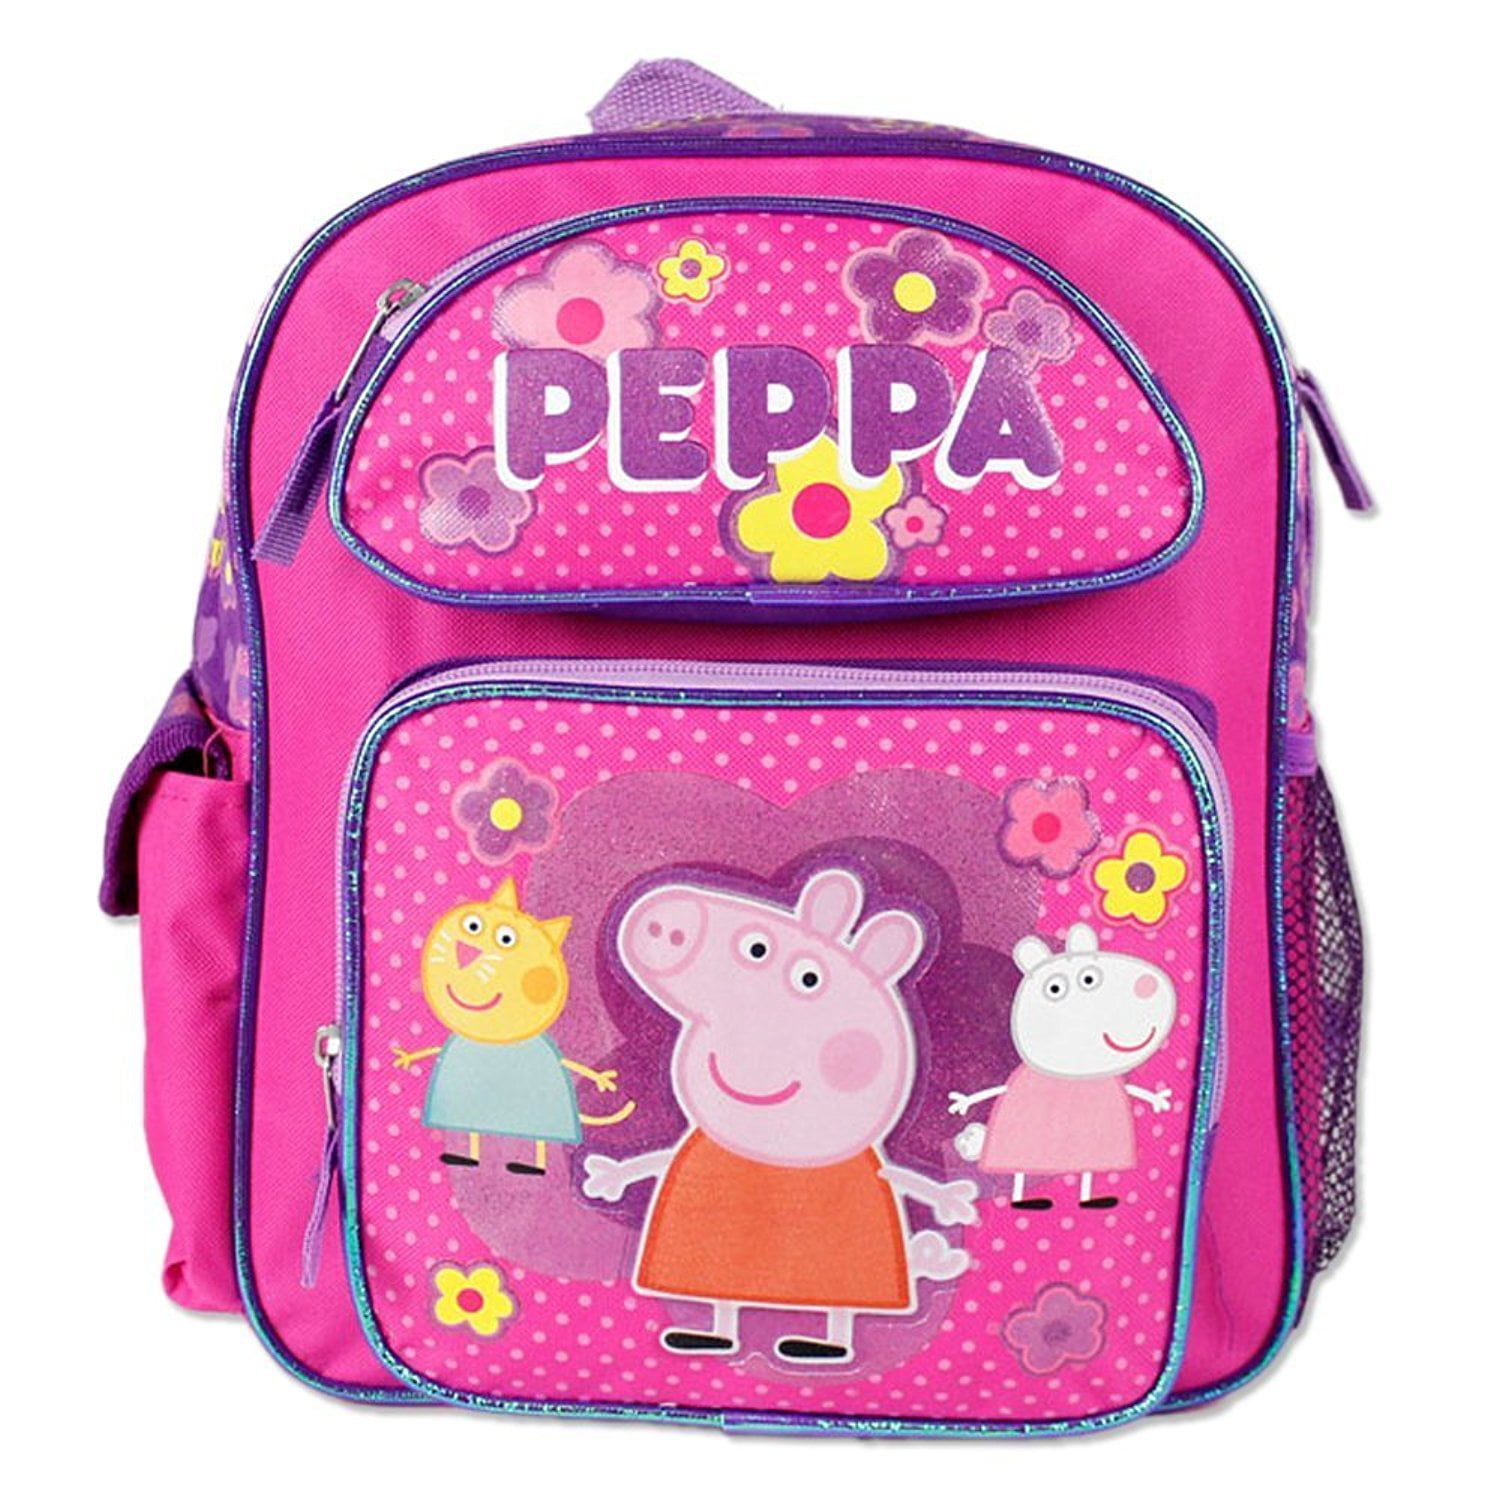 Trade Mark Collections PEPPA PIG REINS BACKPACK Kids Accessories Bag BN 